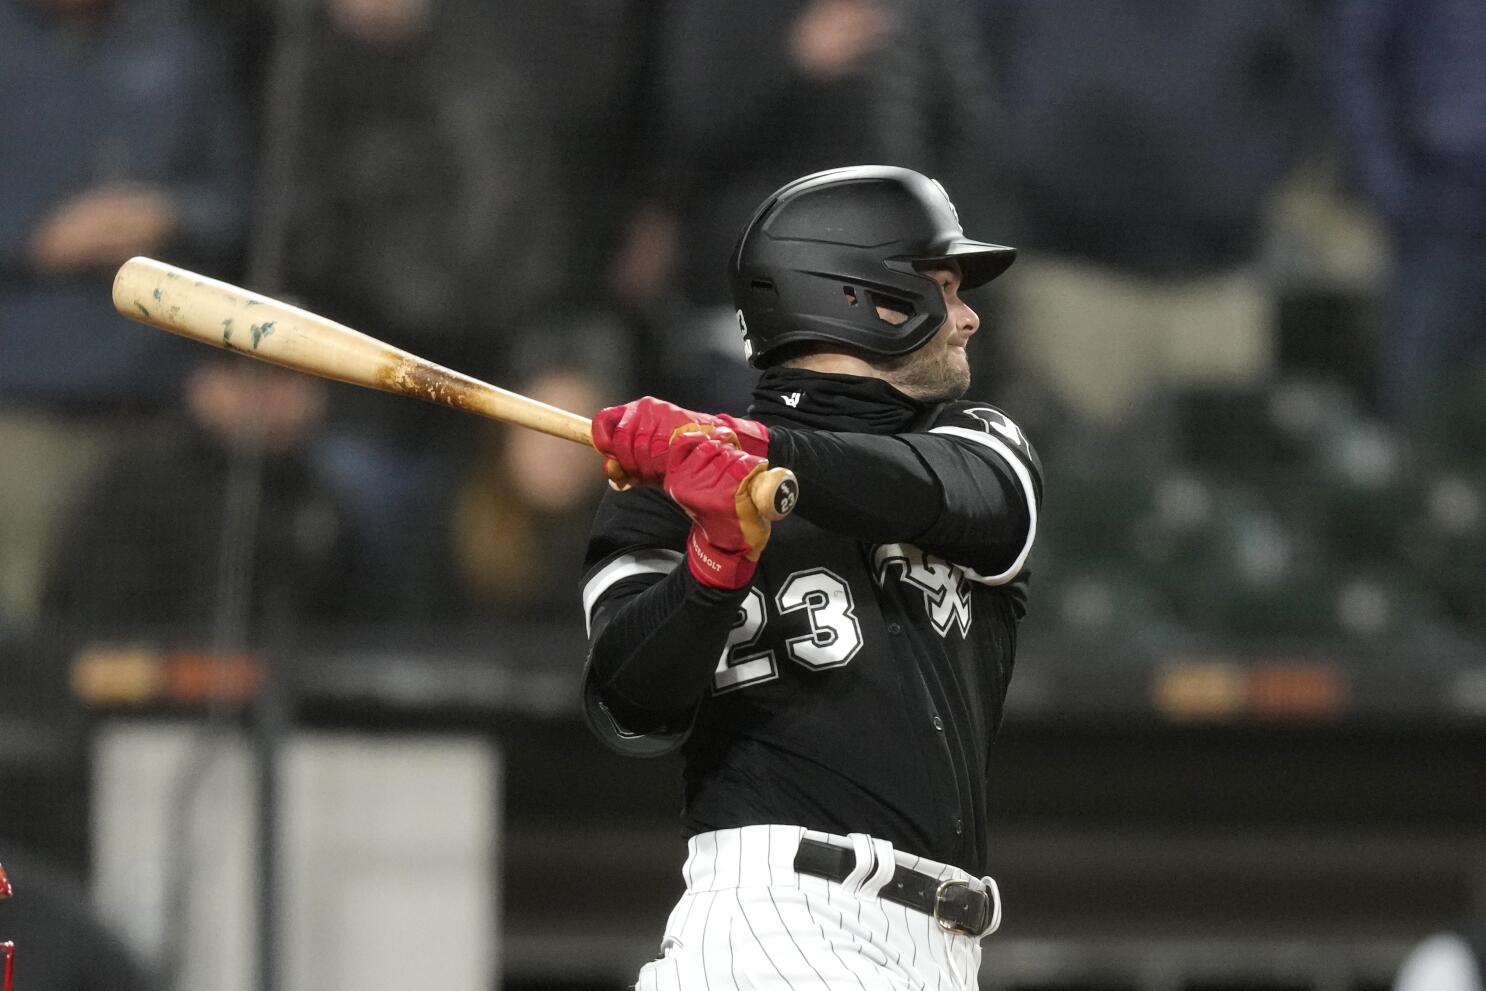 Benintendi stars as White Sox top Twins 3-2 in 10 innings - The